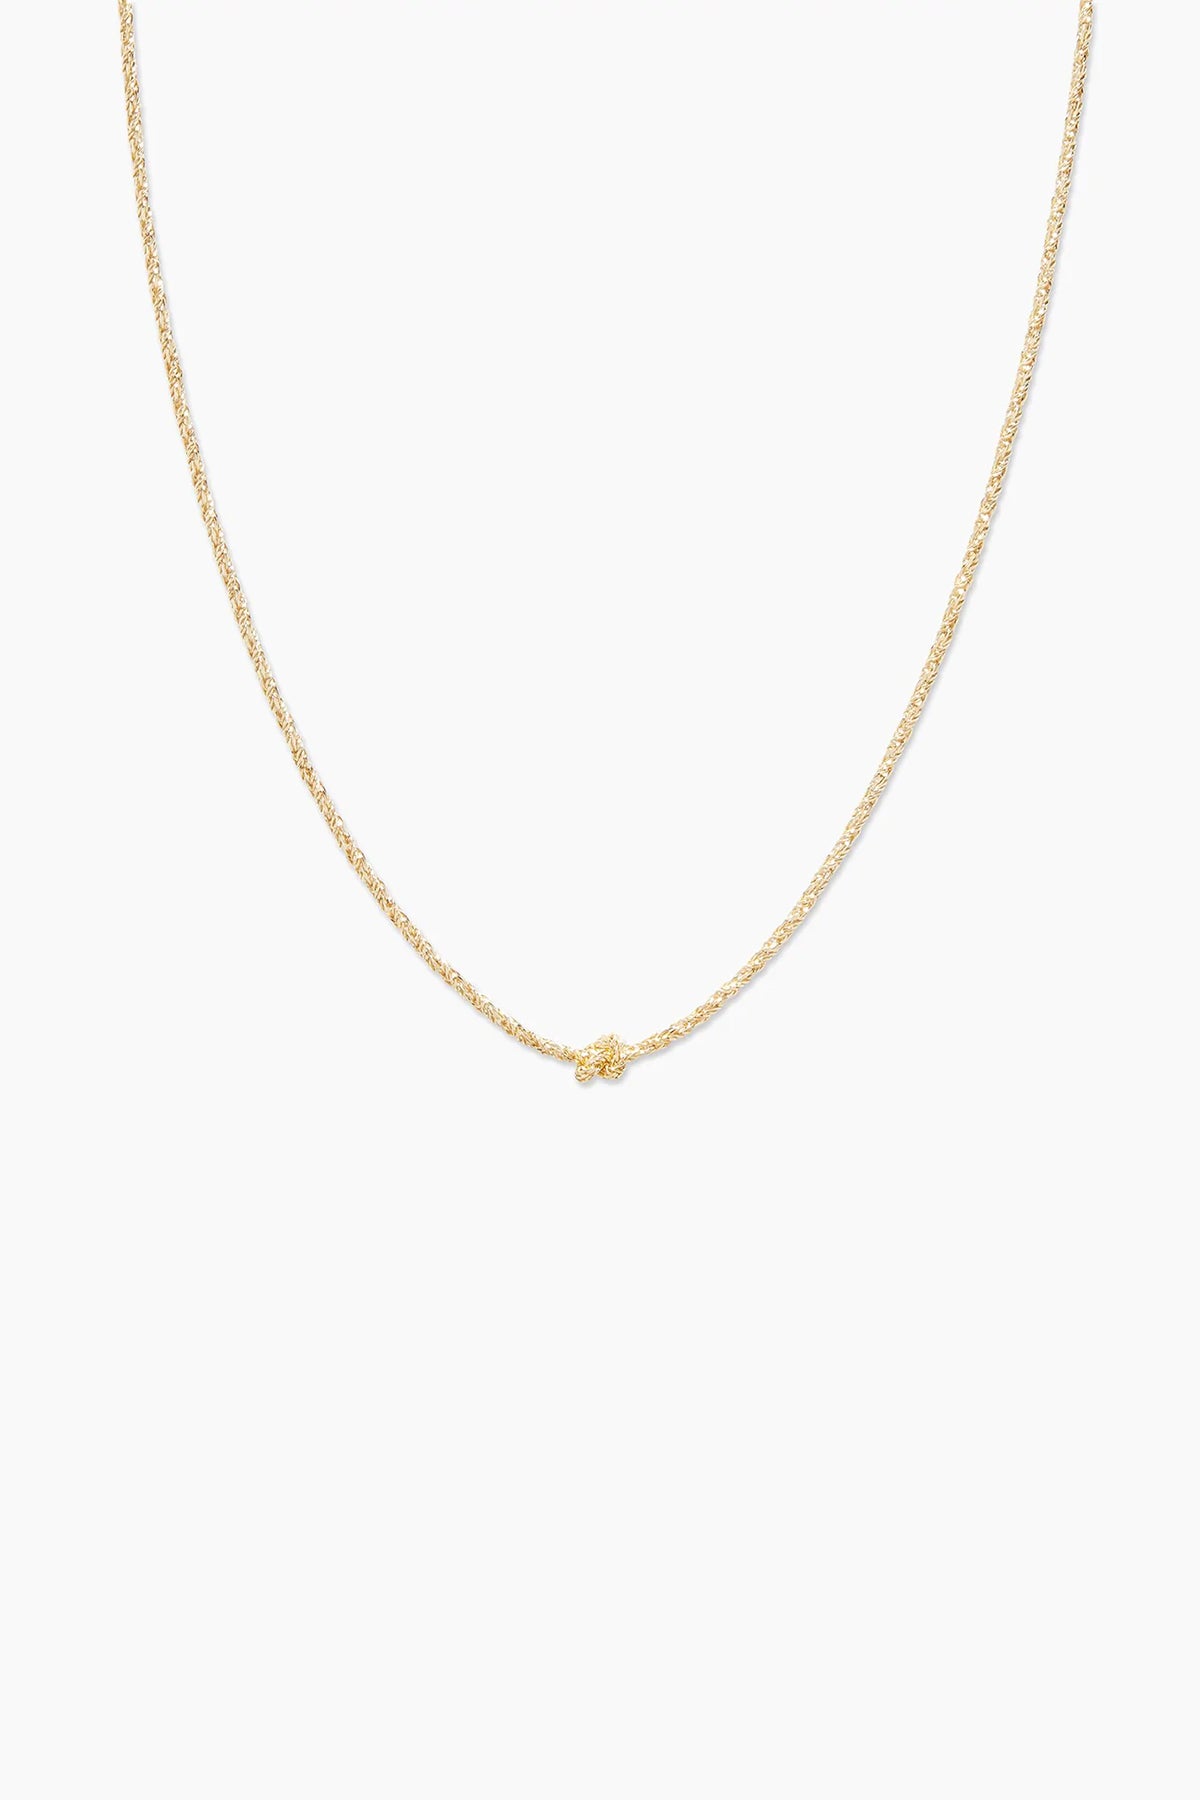 Women' Business Marin Necklace - Gold NORA GARDNER | OFFICIAL STORE for work and office